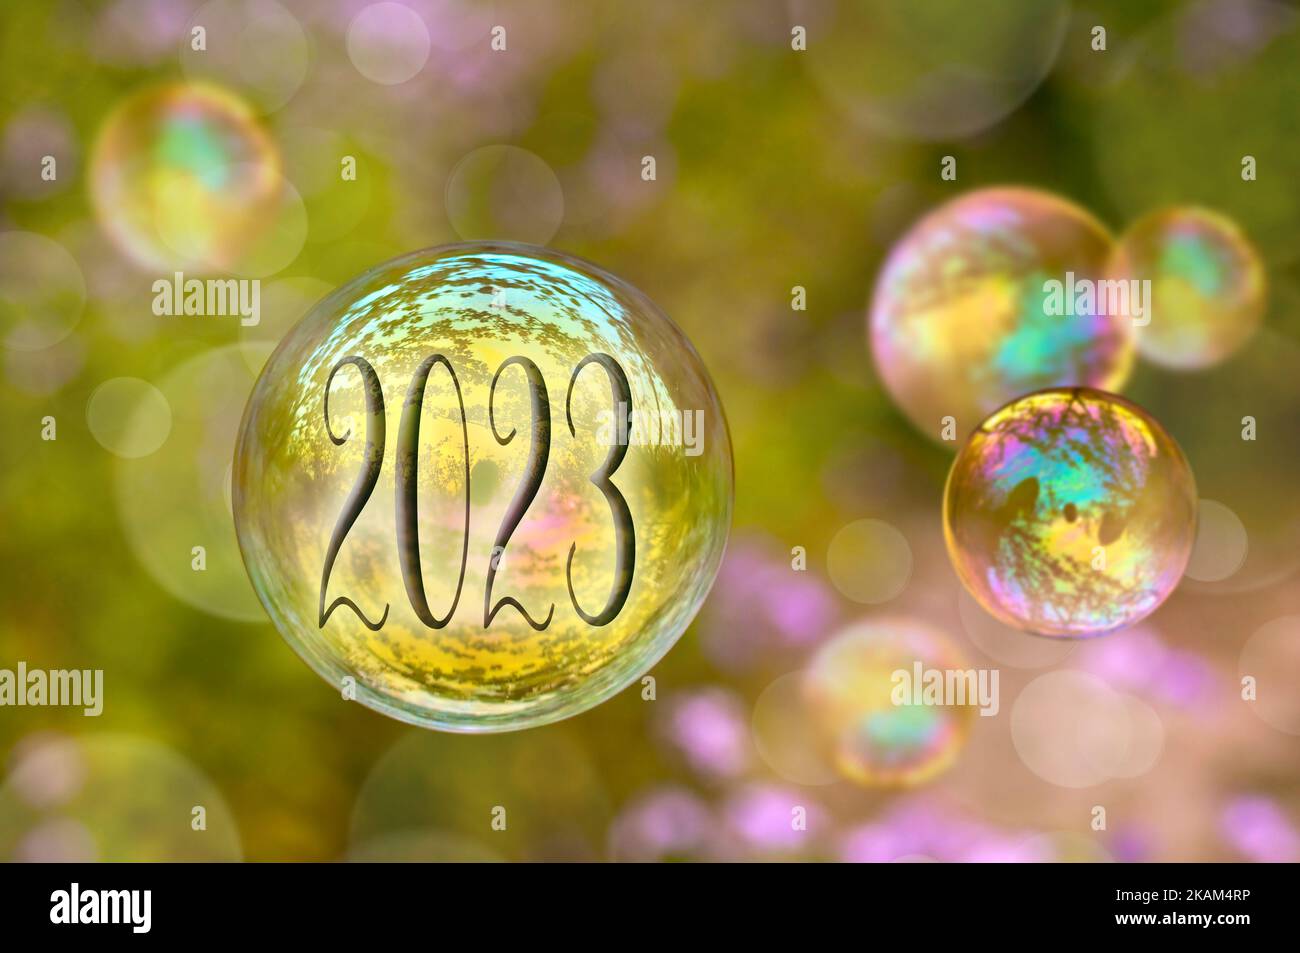 2023 soap bubble new year greeting card, lightness green natural ecological concept Stock Photo